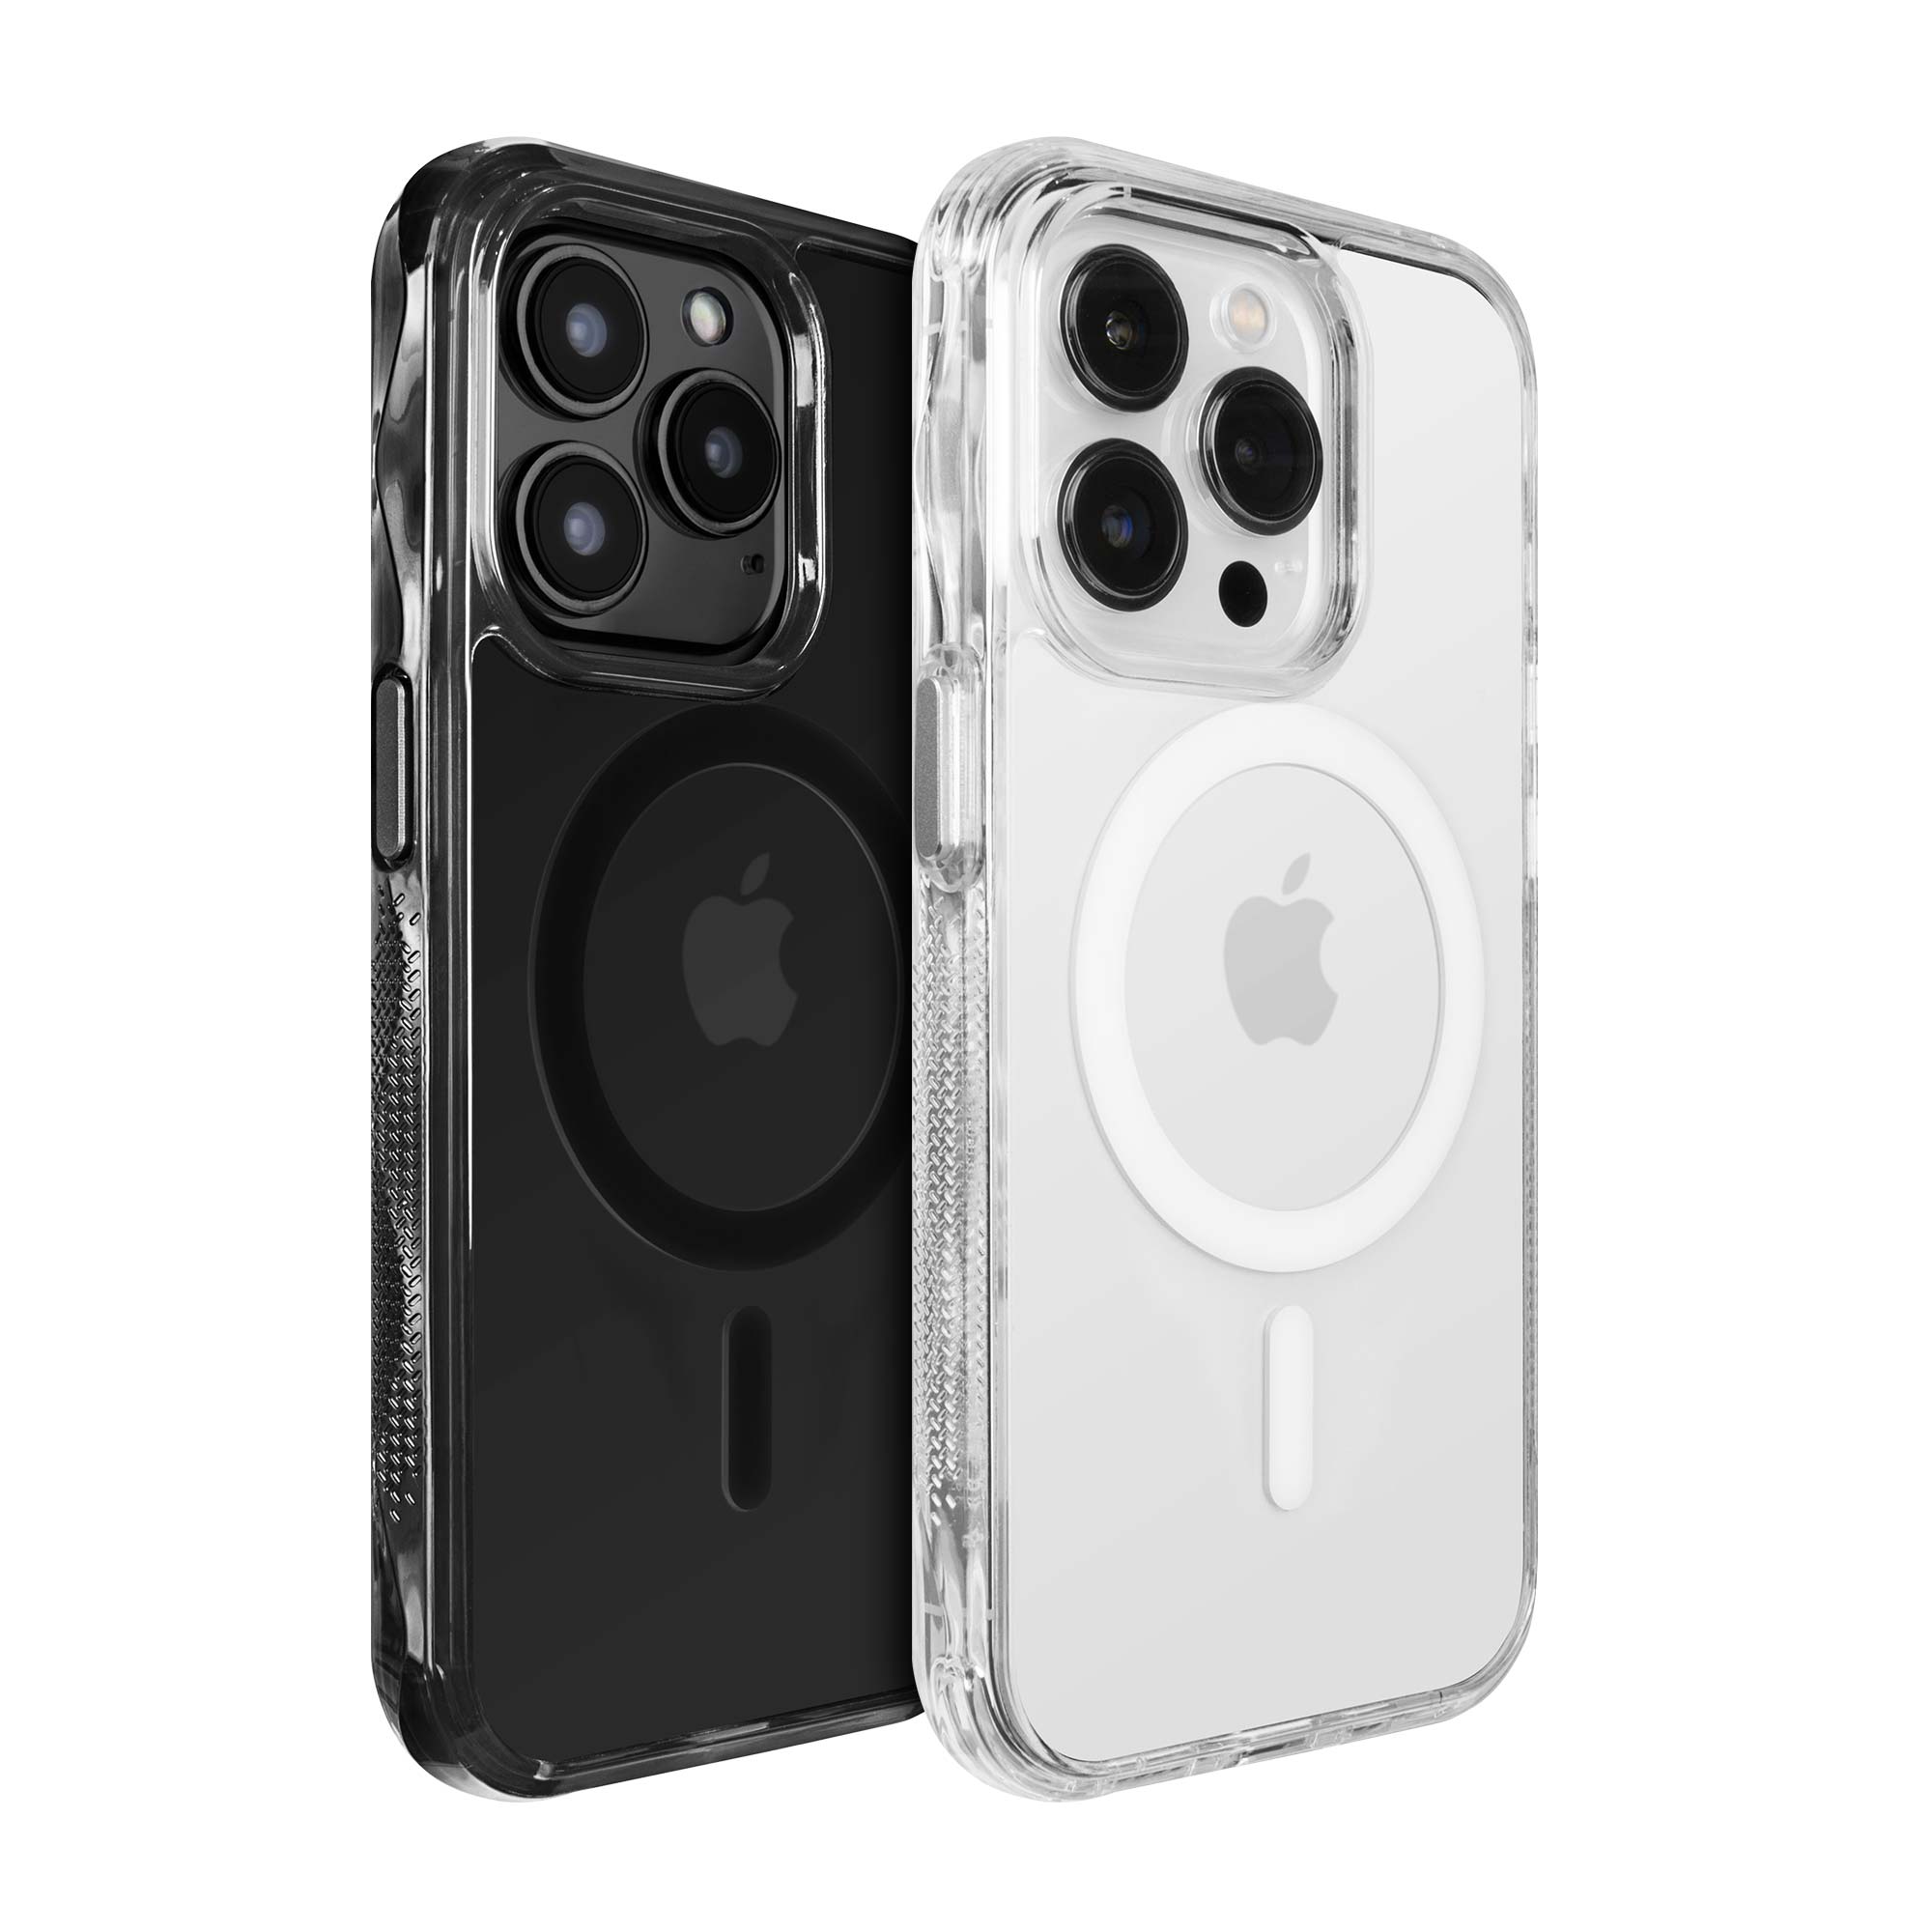 CRYSTAL MATTER X case Compatible with MagSafe for iPhone 14 Series